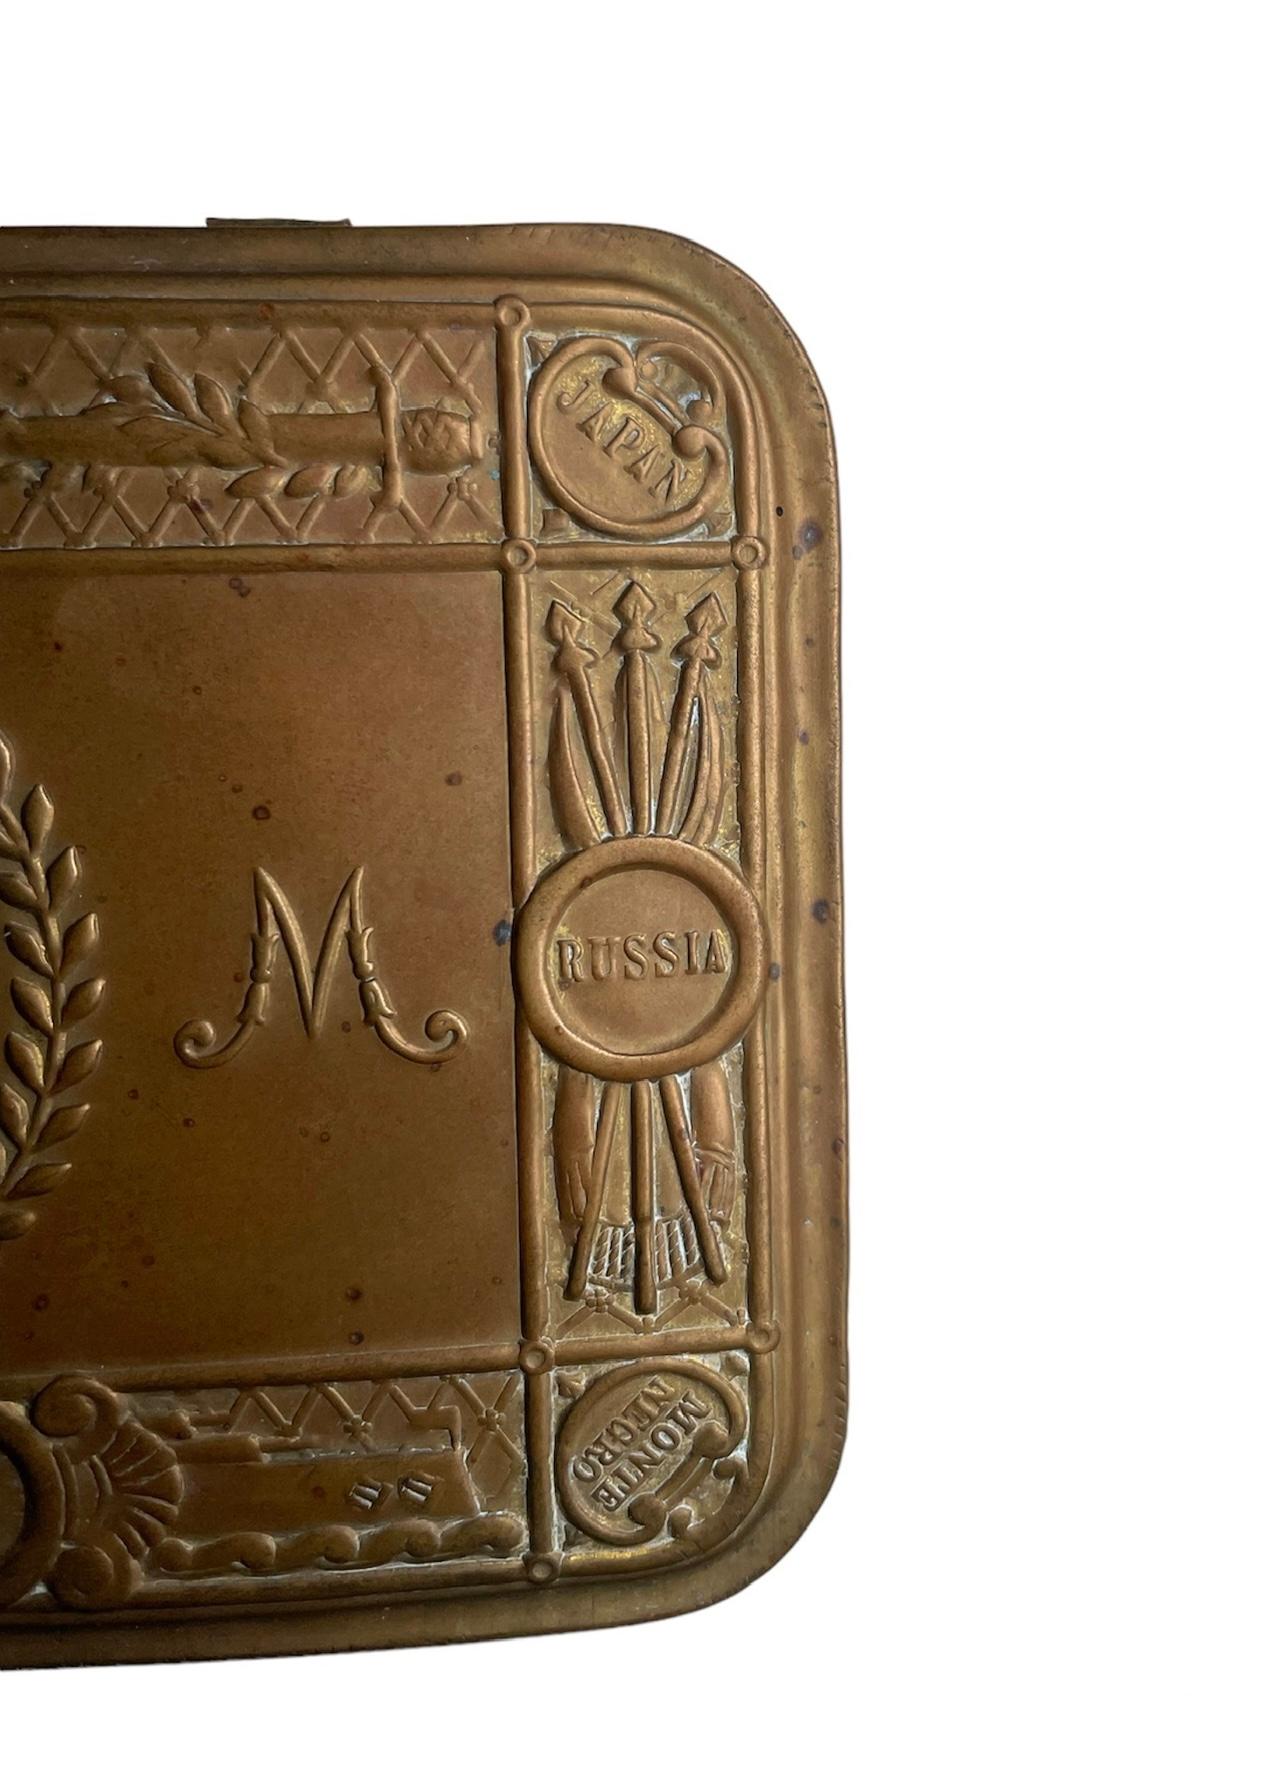 This is an Imperium Britannicum Christmas, 1914 bronze color brass tin tobacco box. The hinged lid of the box depicts a profile of Princess Mary framed with some bay leaves wreath. In the border of the lid, along this decoration are embossed Great